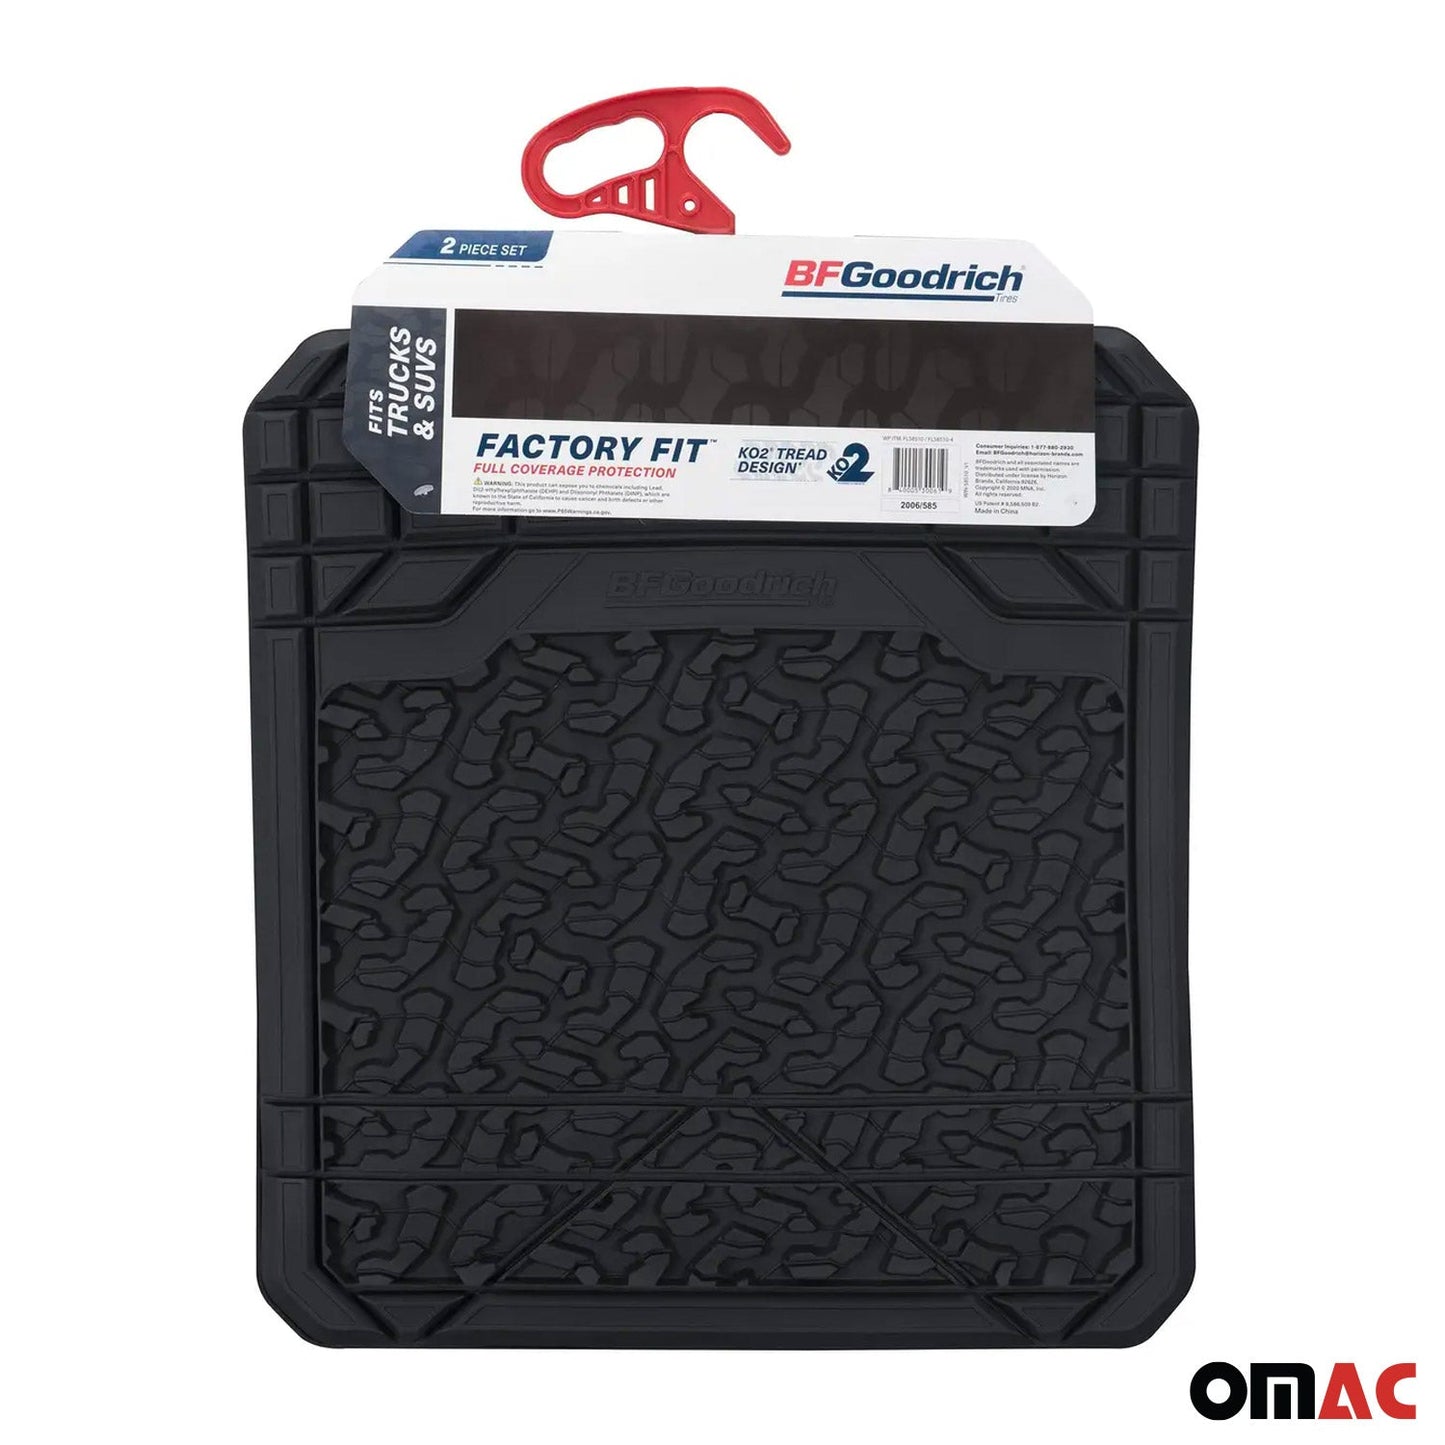 OMAC Anti-Shift Second Row Floor Mats for Trucks & SUV All Weather Black Rubber 2Pcs 96BF445